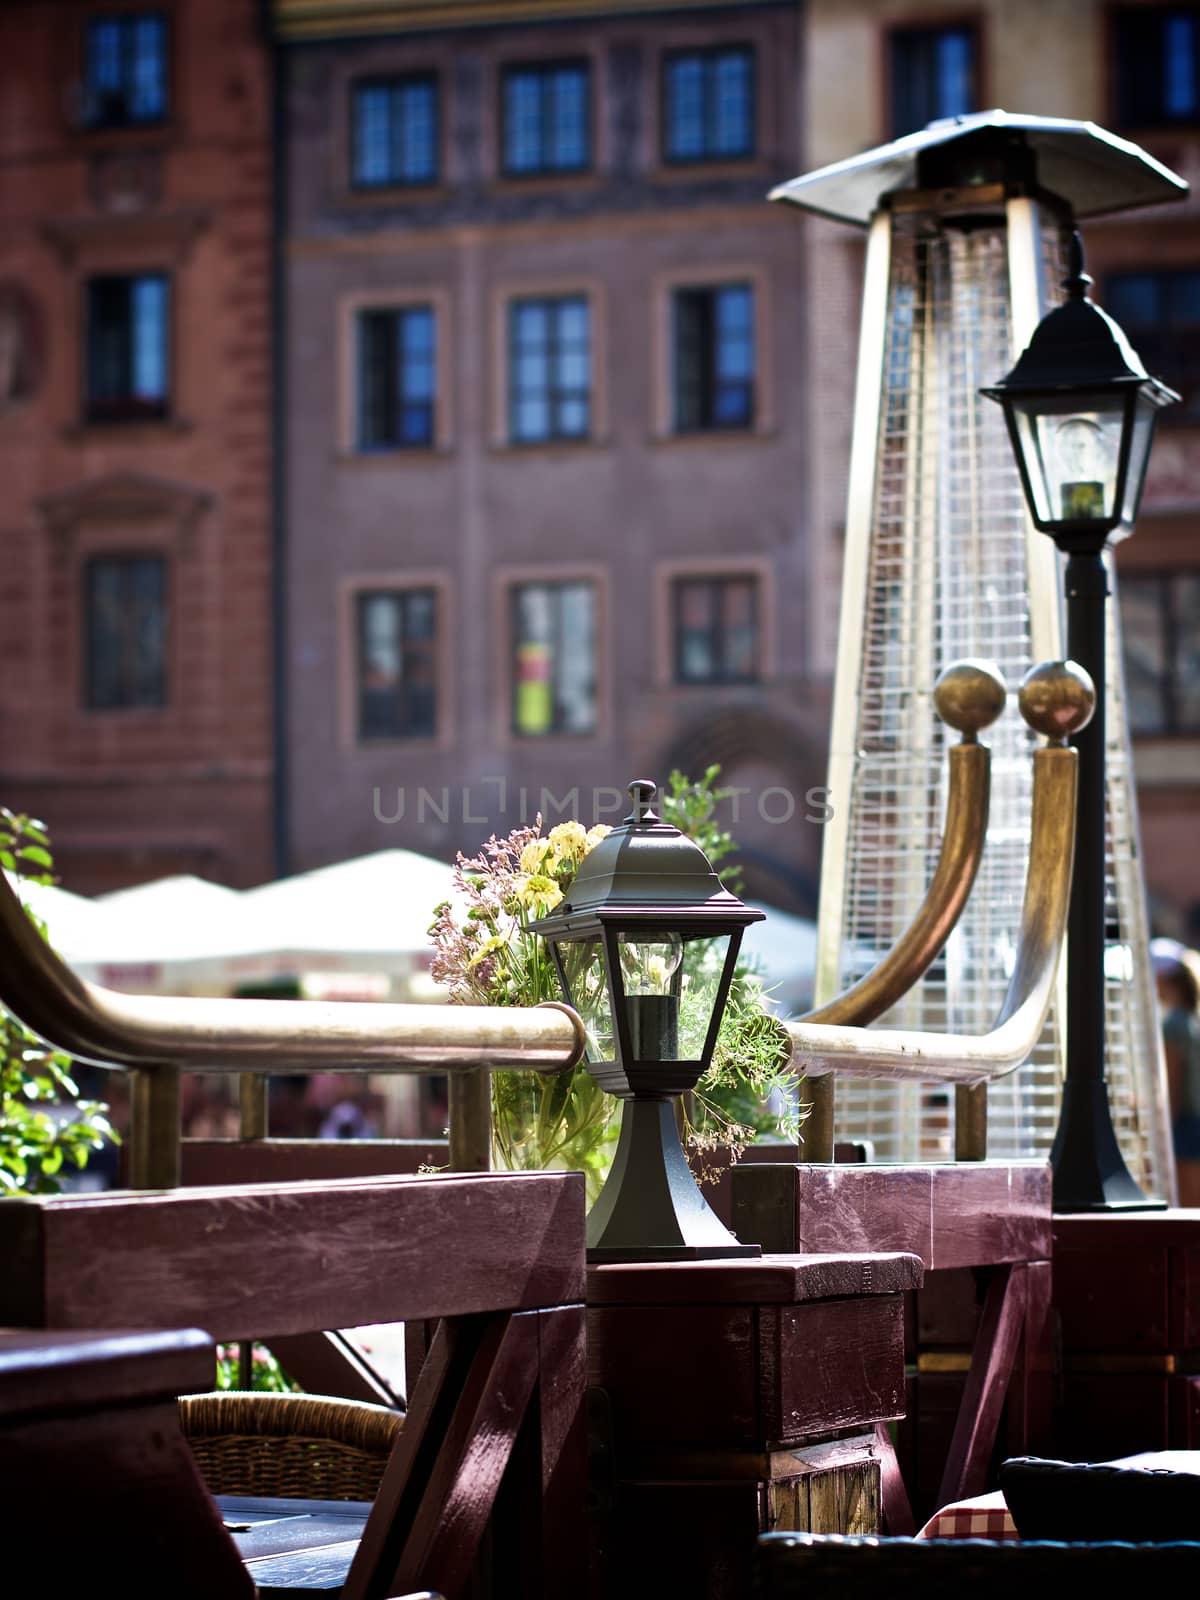 Old Empty Sidewalk Cafe with Wooden Tables, Partitions, Street Lanterns and Heat Stands against Blurred Medieval Houses Outdoors. Warsaw, Poland